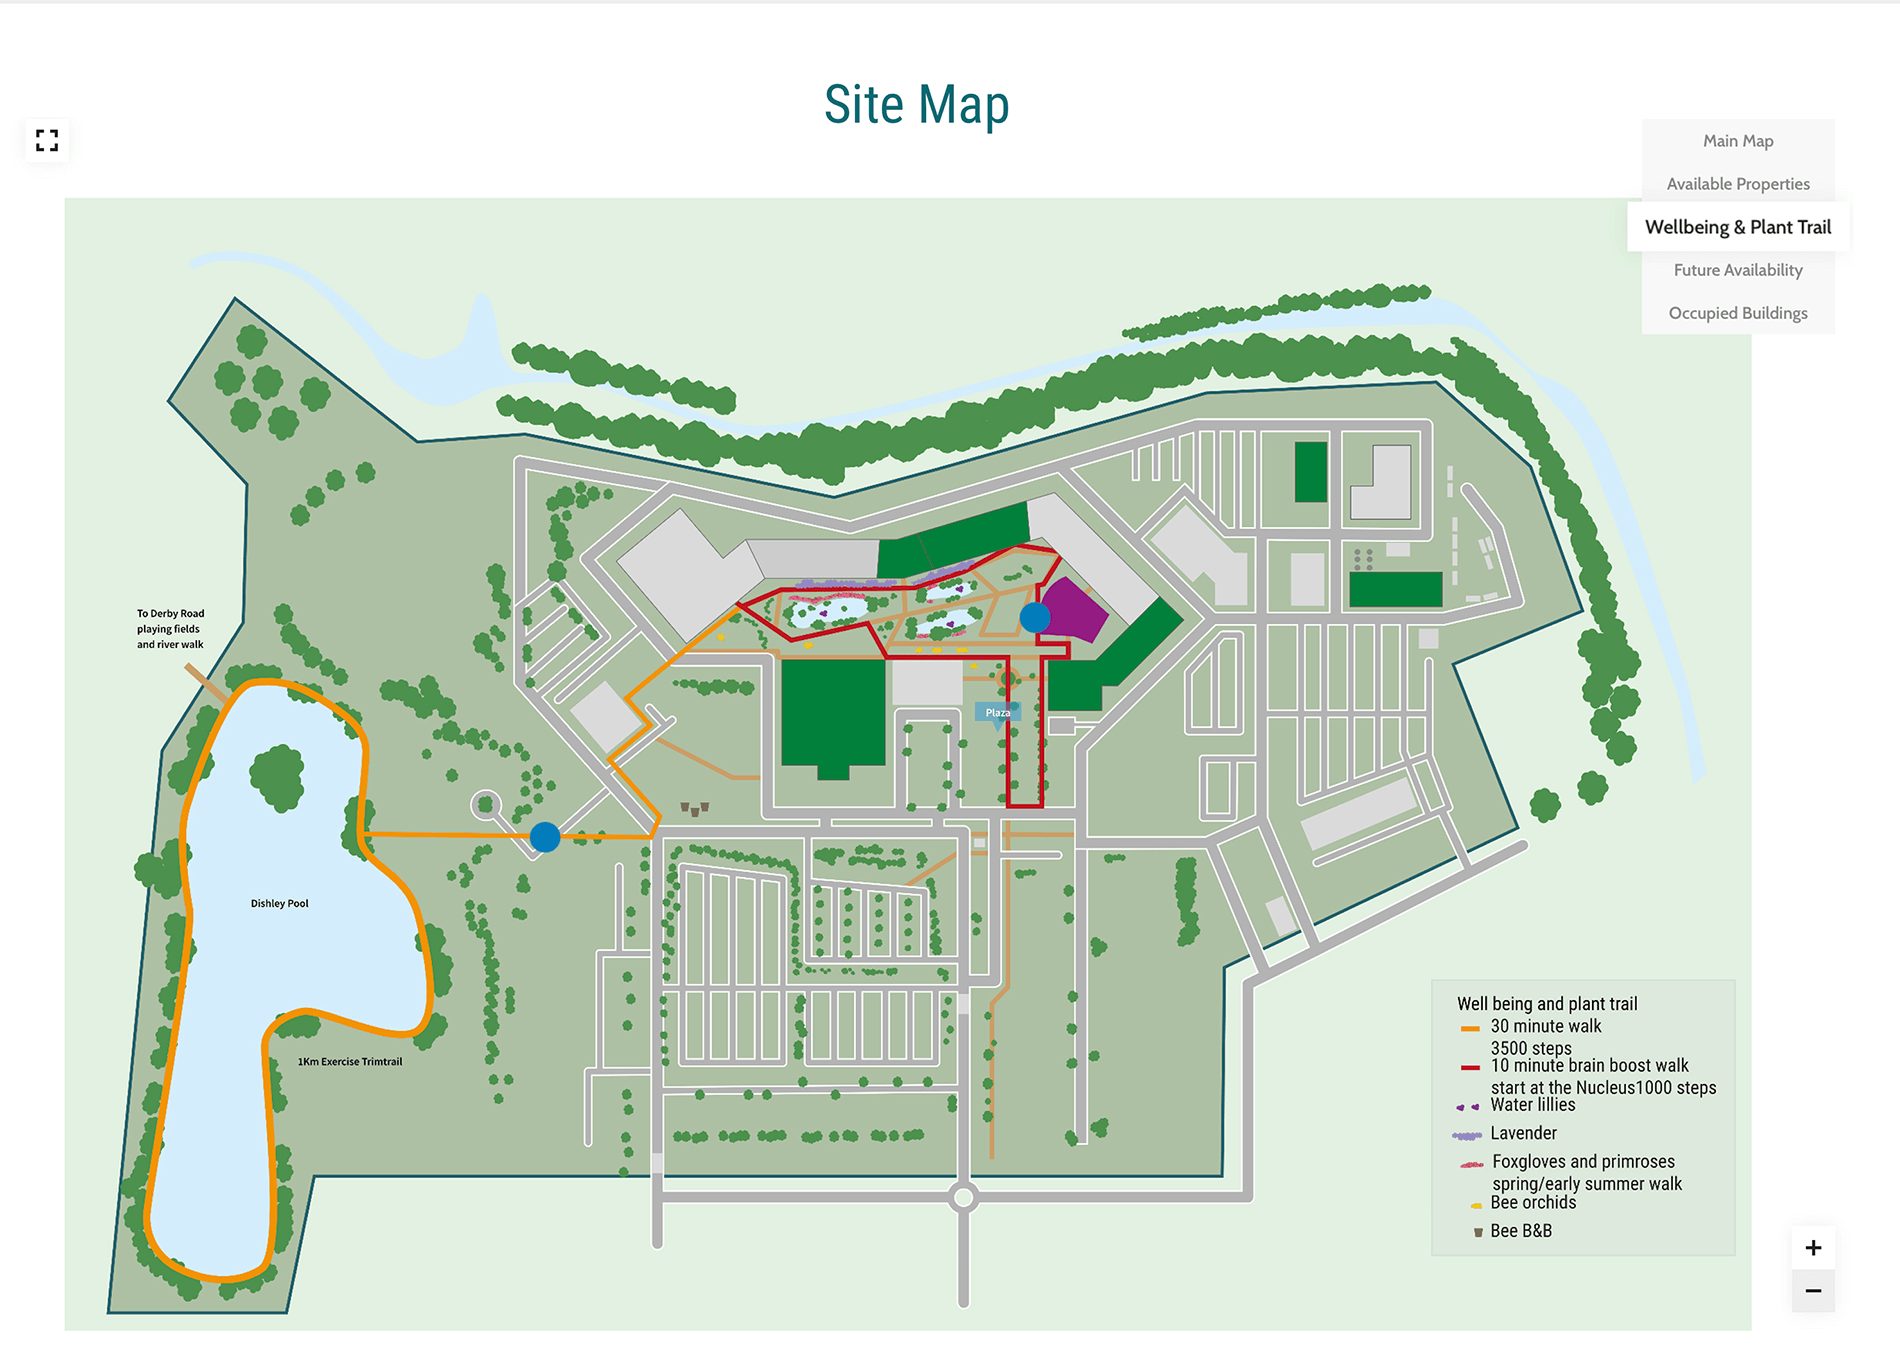 Charnwood Campus Science, Innovation and Technology Park site plan